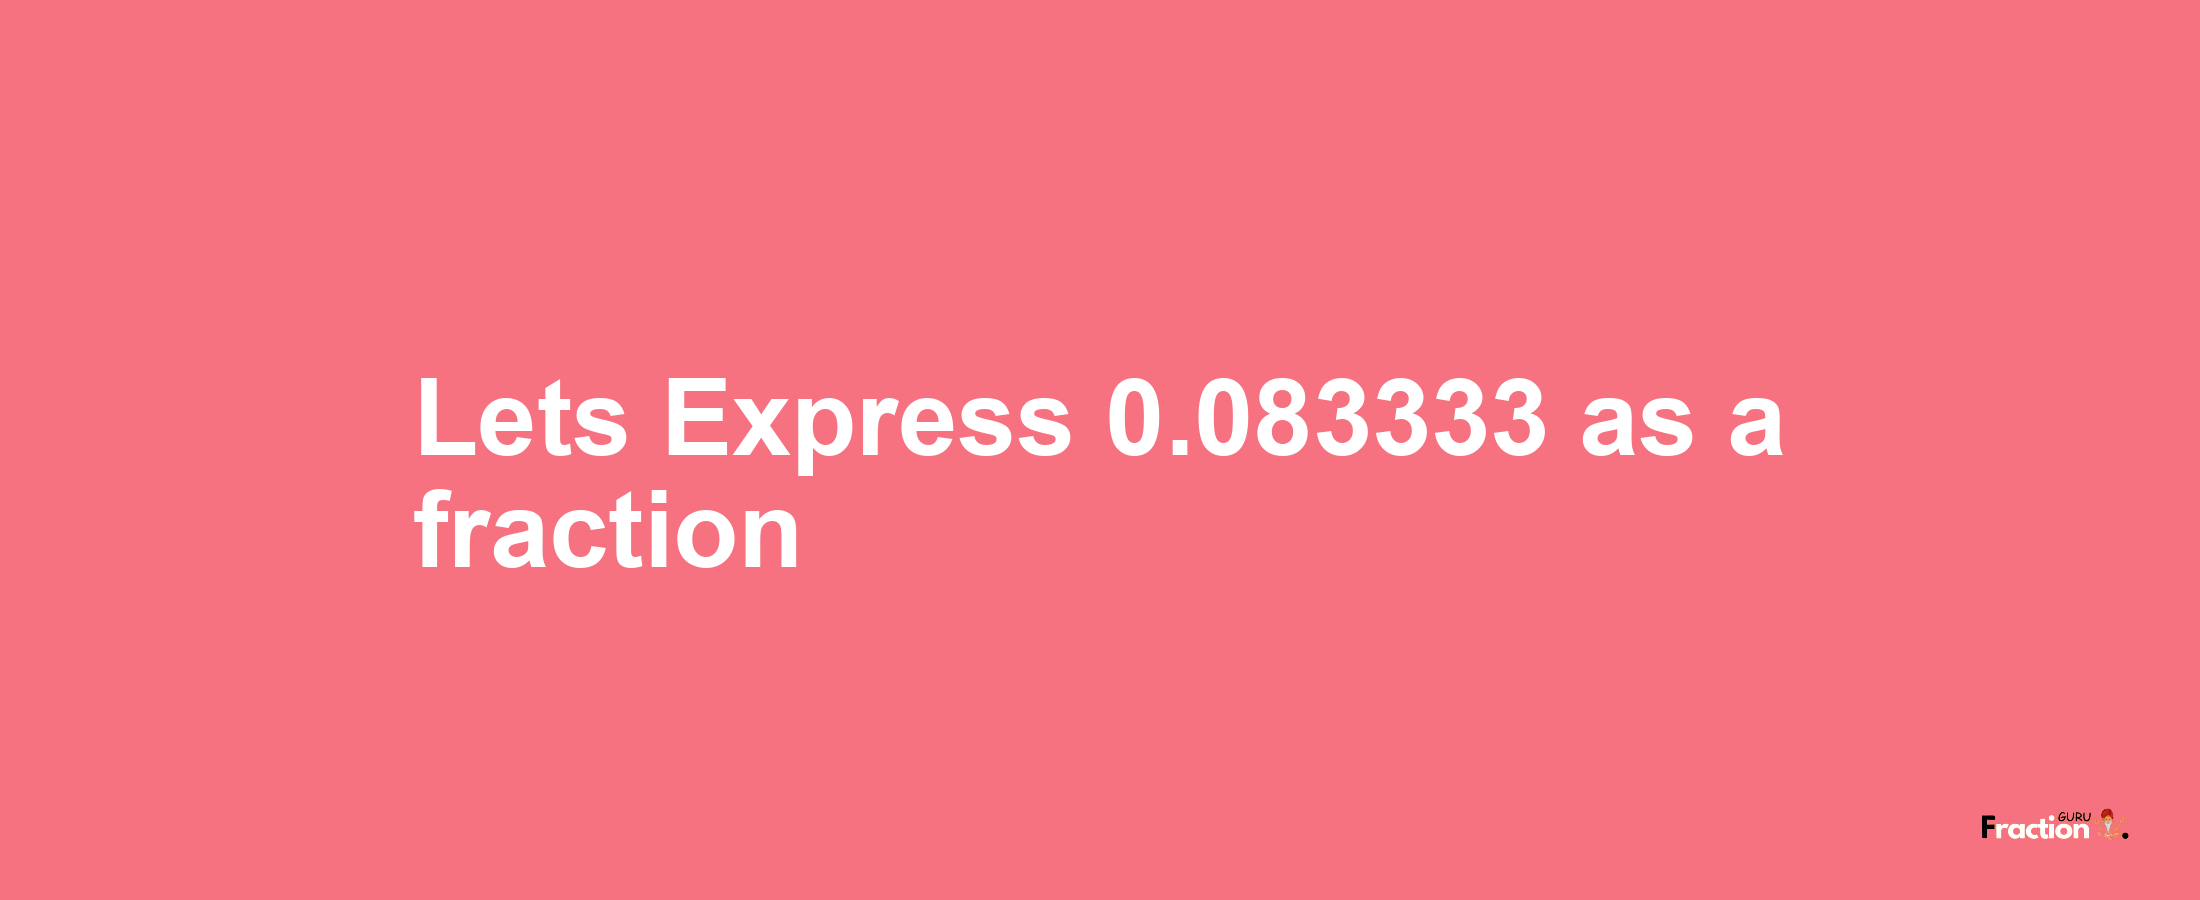 Lets Express 0.083333 as afraction